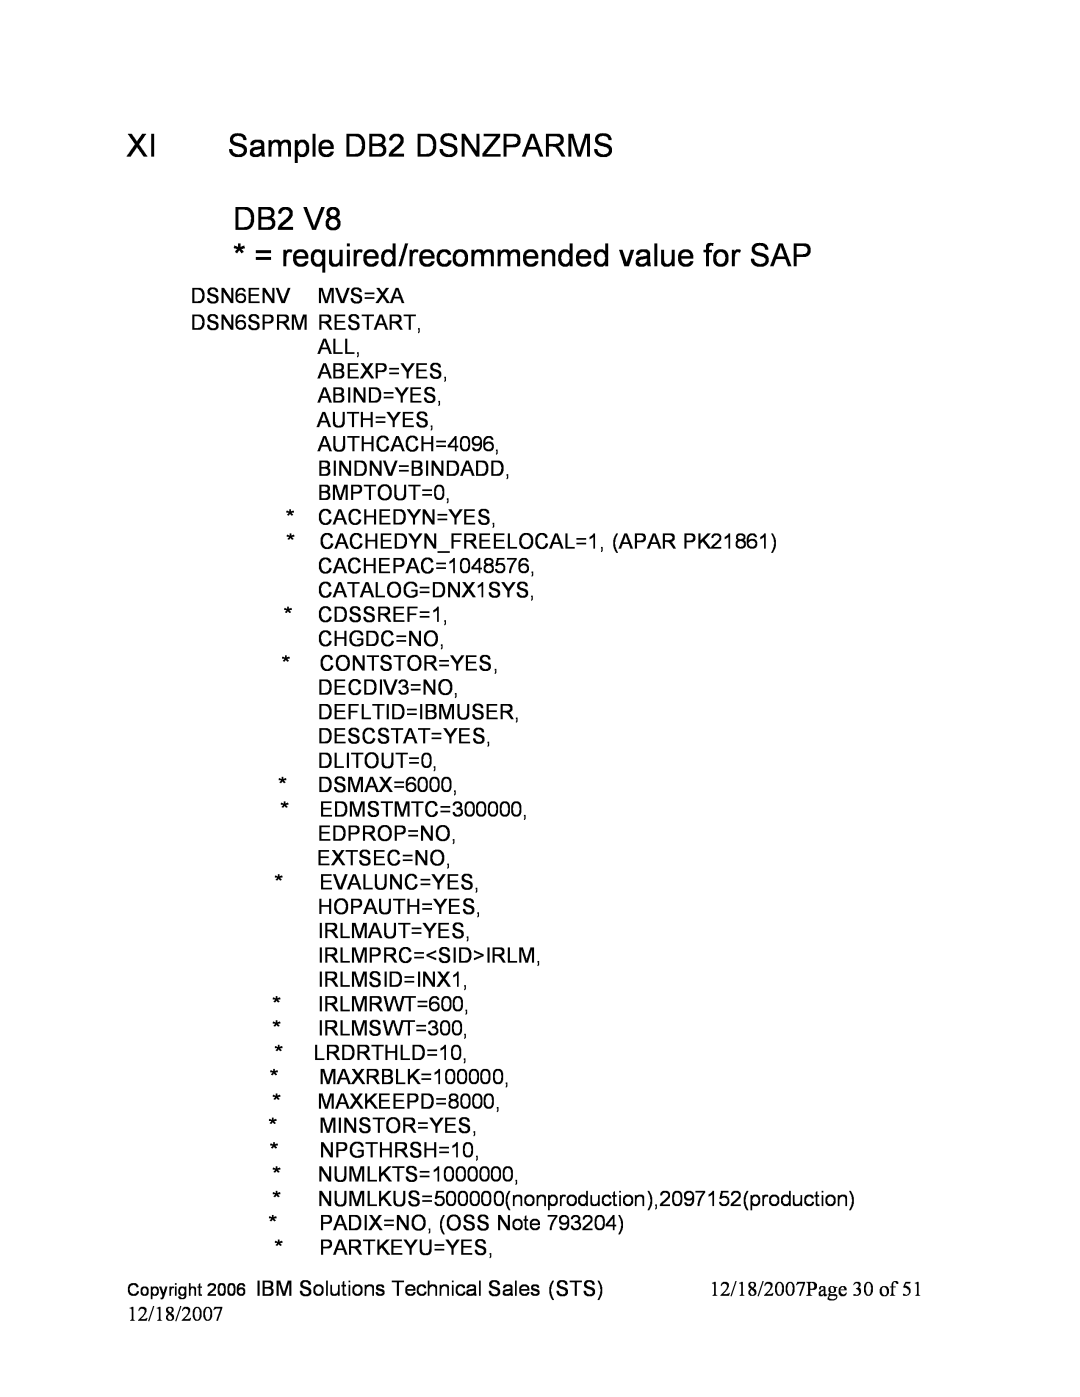 IBM DB2 9, DB2 V8 manual Sample DB2 DSNZPARMS, DB2 = required/recommended value for SAP 